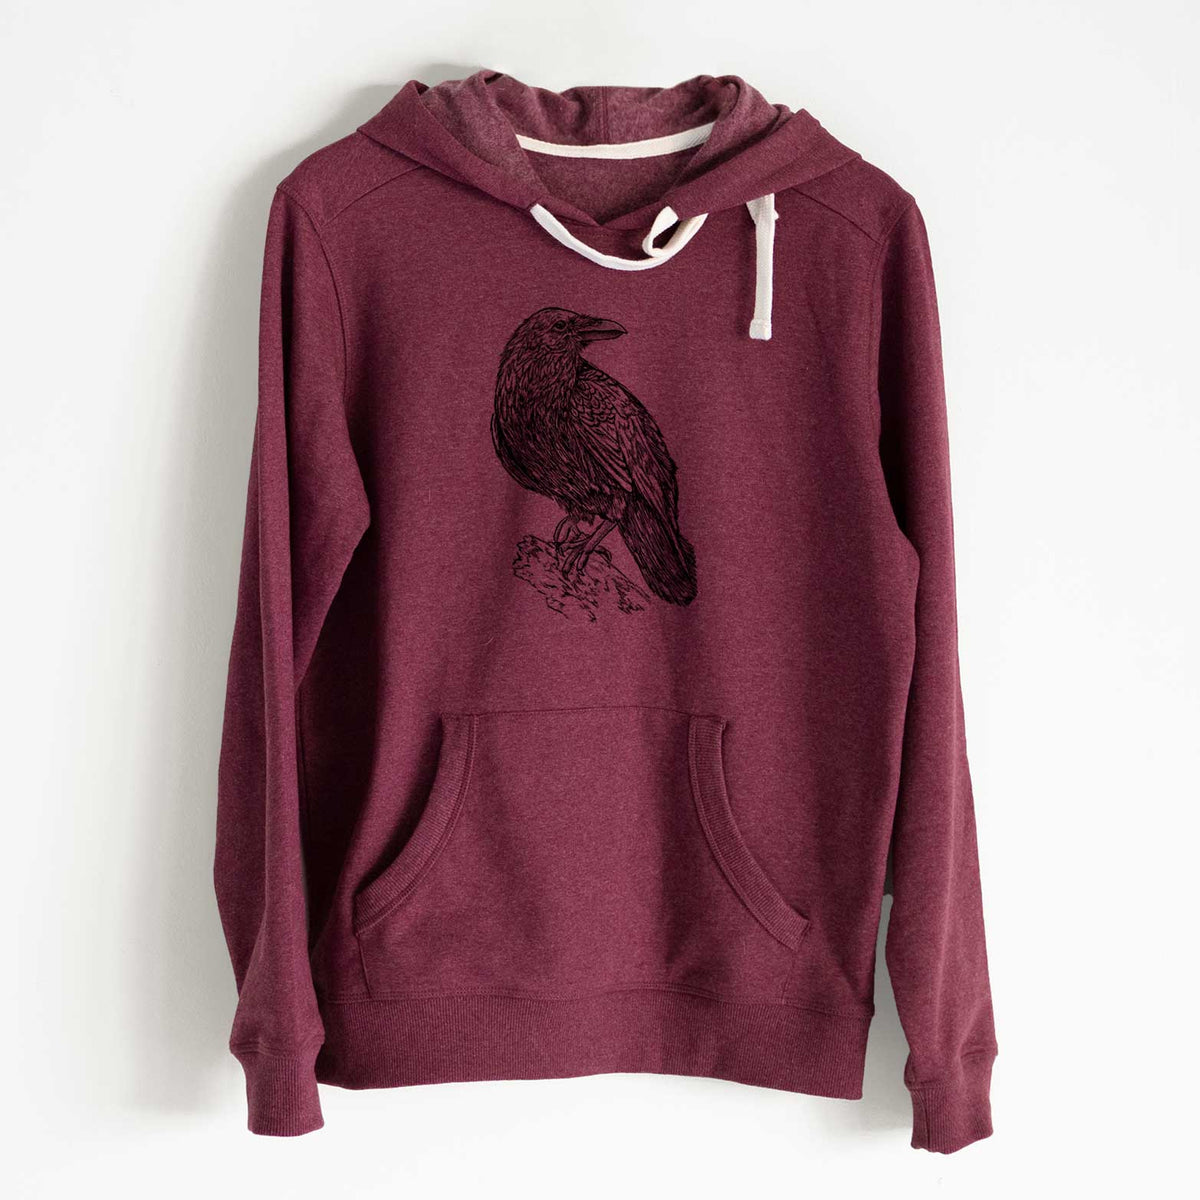 Corvus corax - Common Raven - Unisex Recycled Hoodie - CLOSEOUT - FINAL SALE